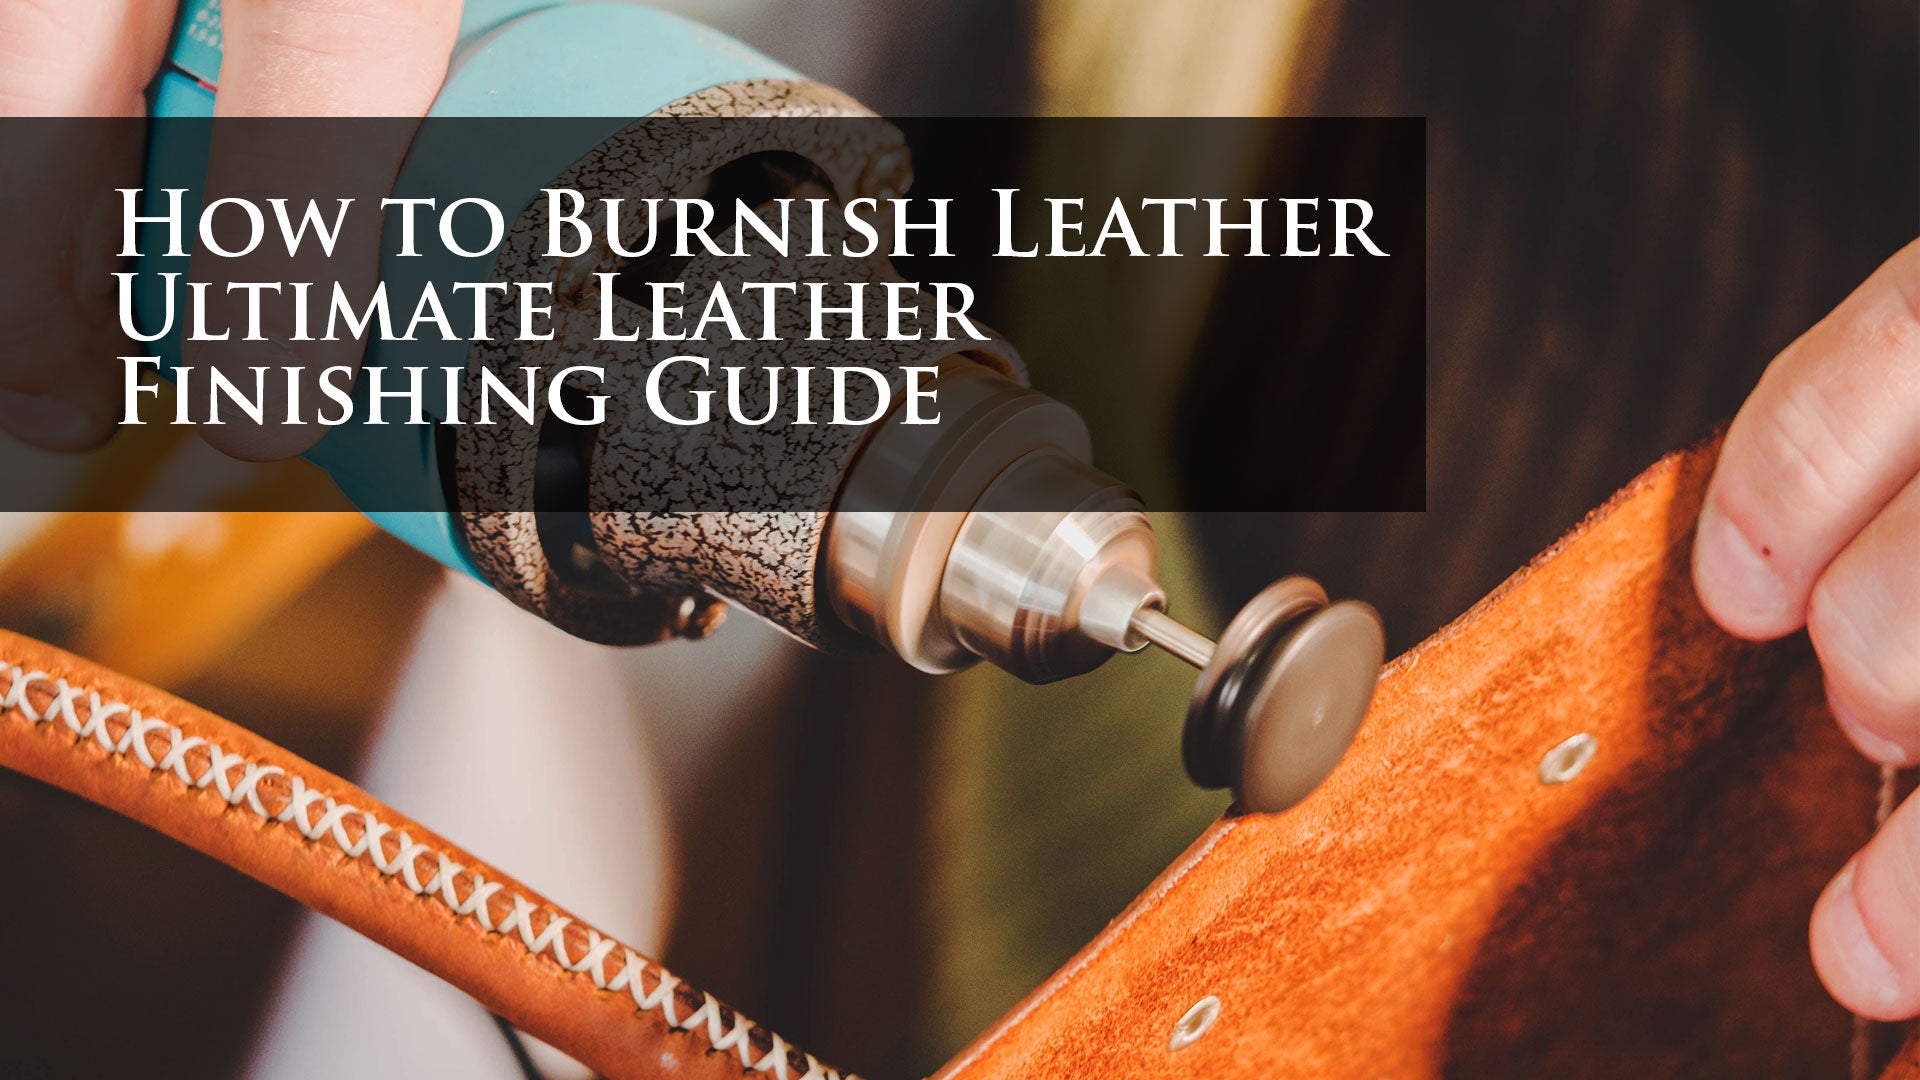 How to Burnish Leather, Ultimate Leather Finishing Guide